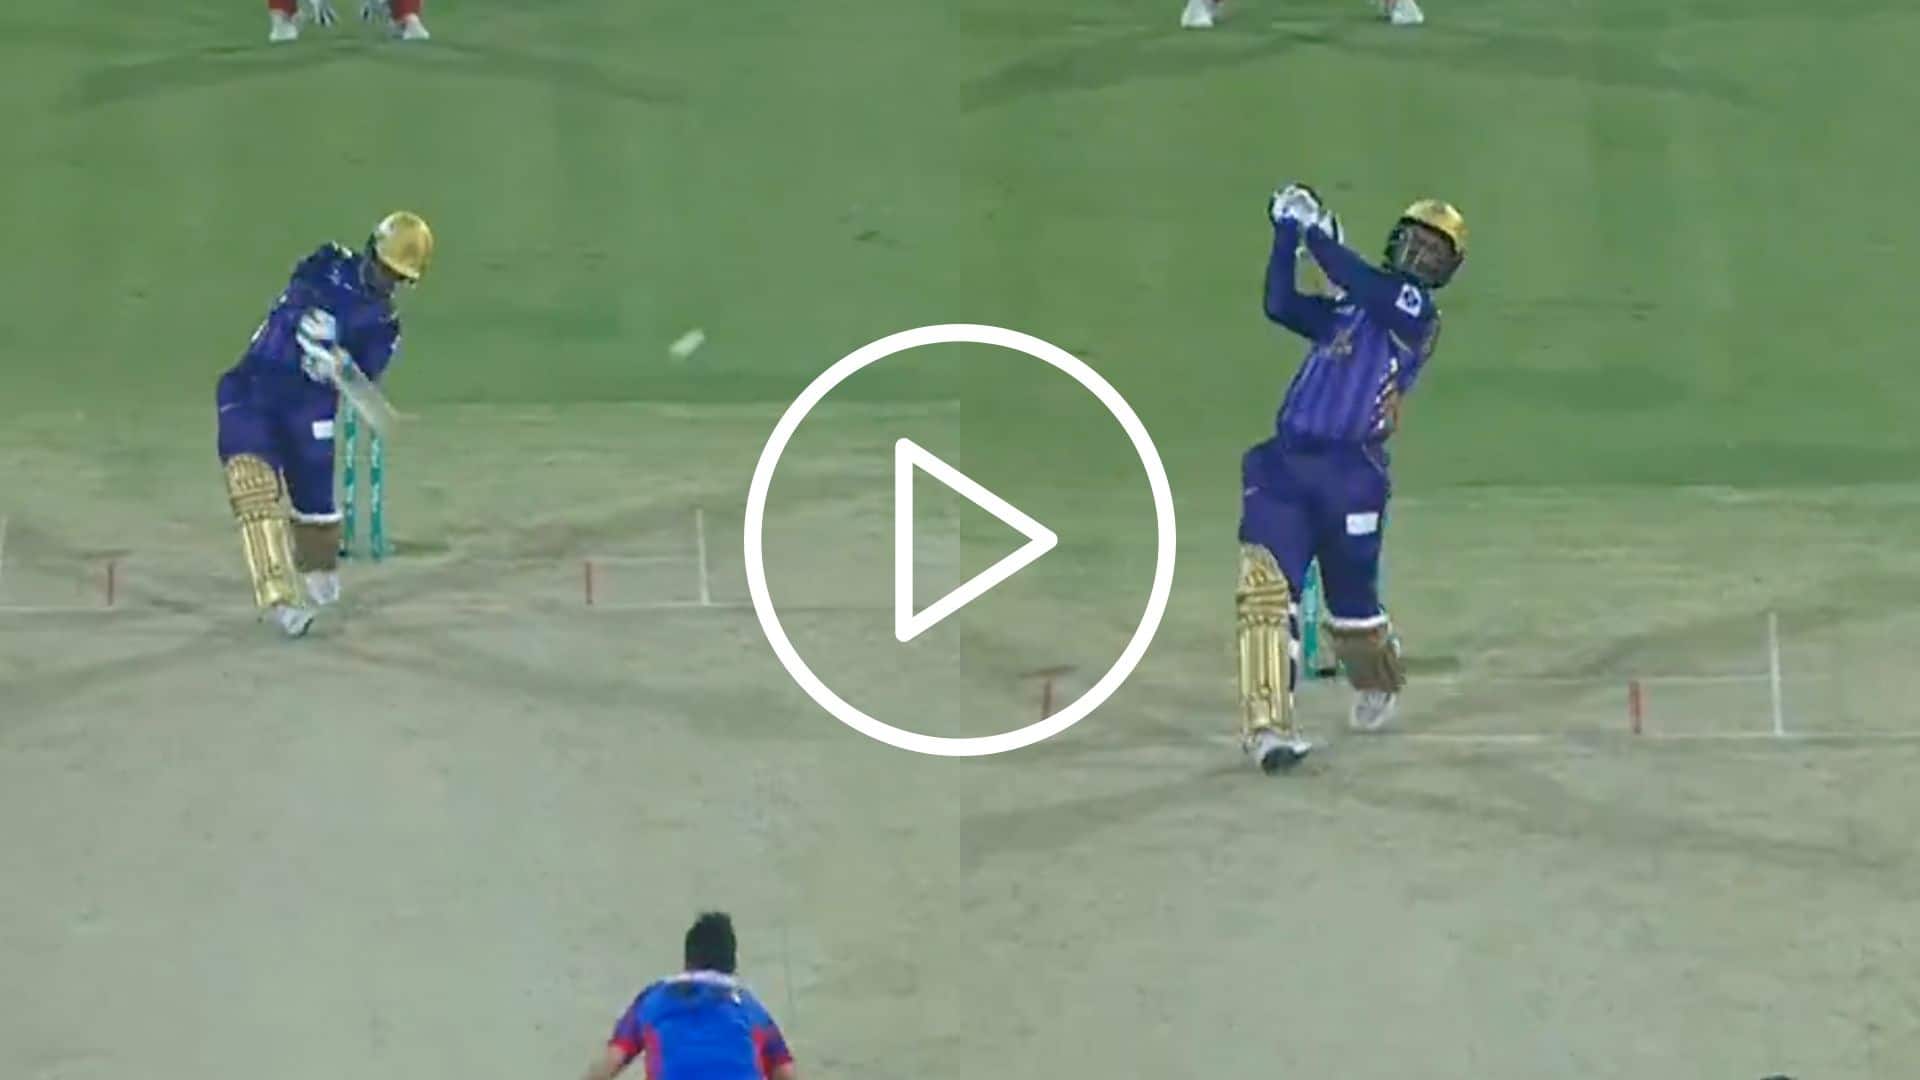 [Watch] Sherfane Rutherford Overcomes Final-Over Drama To Seal Thrilling Win For Quetta